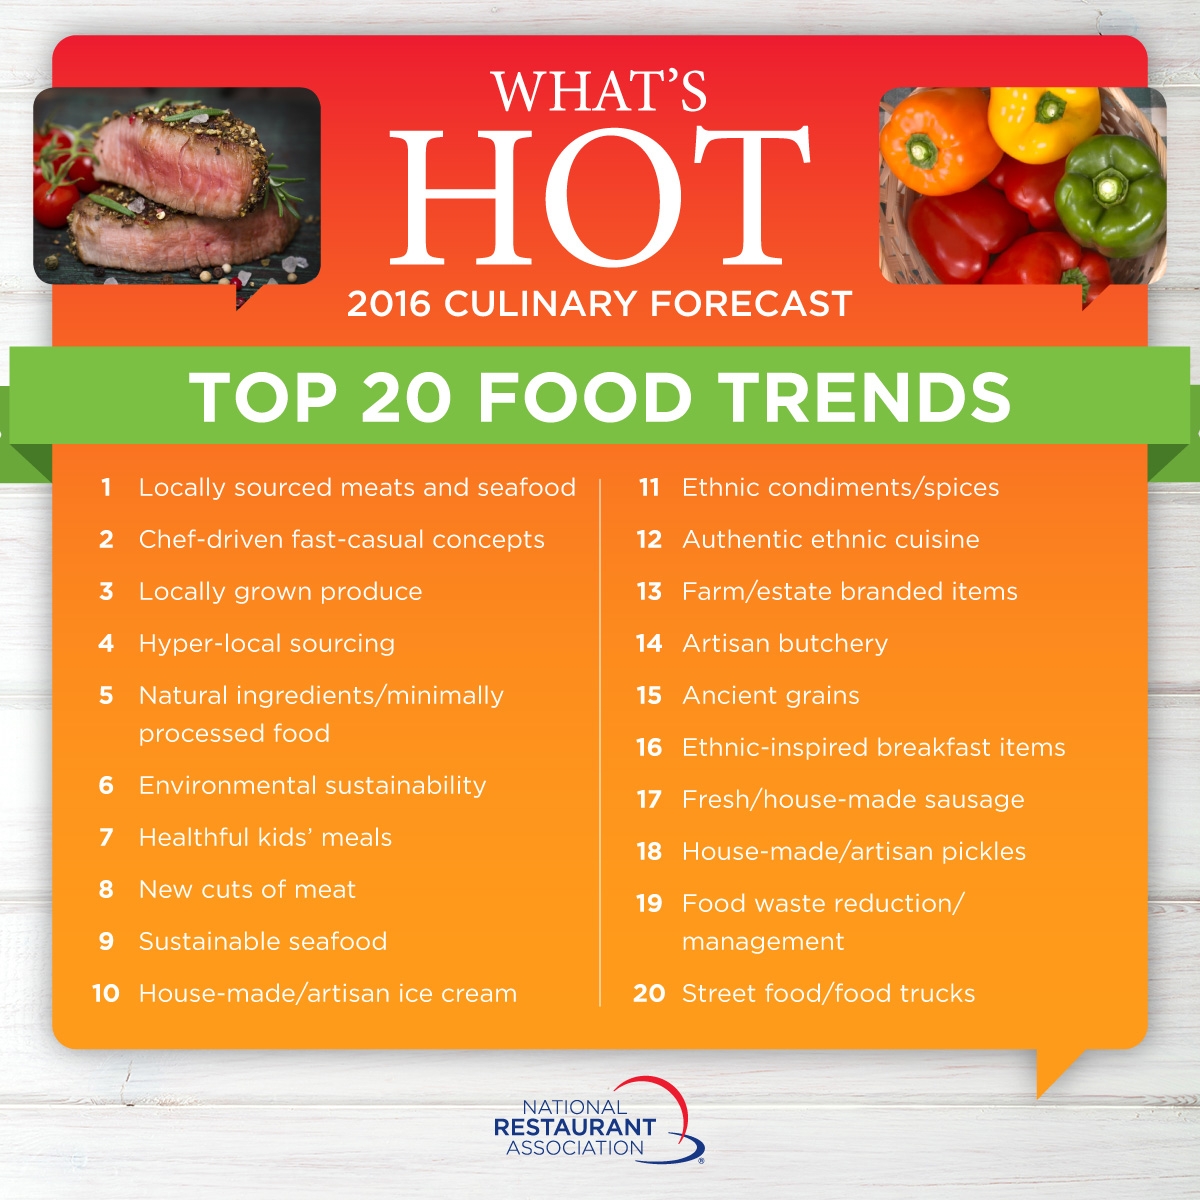 Hot Trends 2016 on Food